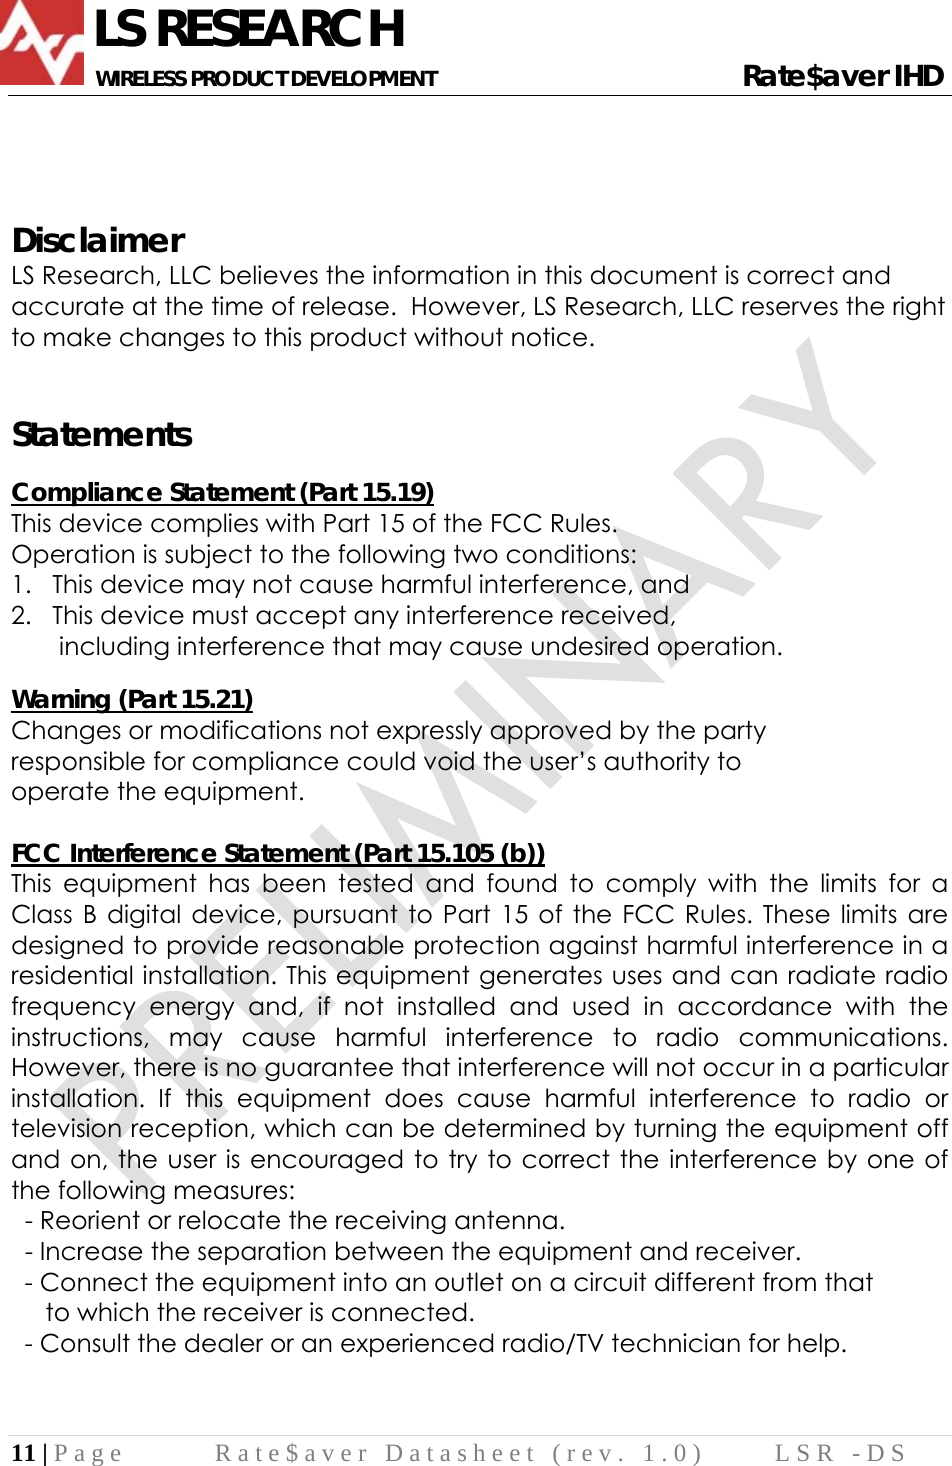              LS RESEARCH       WIRELESS PRODUCT DEVELOPMENT                                                     Rate$aver IHD 11 | Page  Rate$aver Datasheet (rev. 1.0)  LSR -DS     Disclaimer LS Research, LLC believes the information in this document is correct and accurate at the time of release.  However, LS Research, LLC reserves the right to make changes to this product without notice.   Statements  Compliance Statement (Part 15.19) This device complies with Part 15 of the FCC Rules.  Operation is subject to the following two conditions:  1.   This device may not cause harmful interference, and  2.   This device must accept any interference received,         including interference that may cause undesired operation.  Warning (Part 15.21) Changes or modifications not expressly approved by the party  responsible for compliance could void the user’s authority to  operate the equipment.  FCC Interference Statement (Part 15.105 (b)) This equipment has been tested and found to comply with the limits for a Class B digital device, pursuant to Part 15 of the FCC Rules. These limits are designed to provide reasonable protection against harmful interference in a residential installation. This equipment generates uses and can radiate radio frequency energy and, if not installed and used in accordance with the instructions, may cause harmful interference to radio communications. However, there is no guarantee that interference will not occur in a particular installation. If this equipment does cause harmful interference to radio or television reception, which can be determined by turning the equipment off and on, the user is encouraged to try to correct the interference by one of the following measures:   - Reorient or relocate the receiving antenna.   - Increase the separation between the equipment and receiver.   - Connect the equipment into an outlet on a circuit different from that        to which the receiver is connected.   - Consult the dealer or an experienced radio/TV technician for help.    